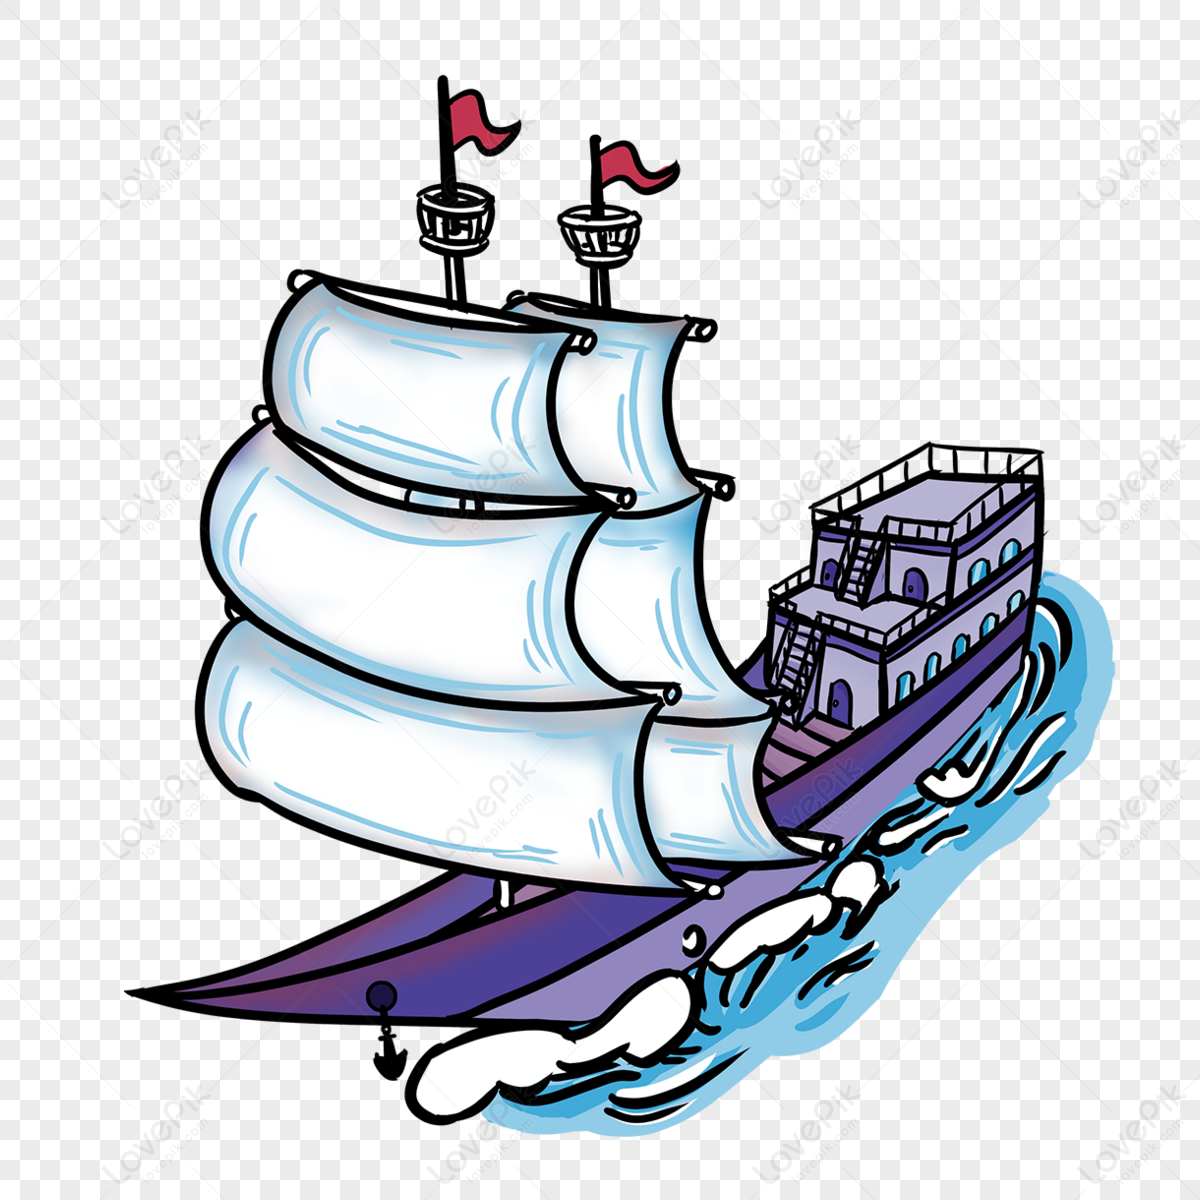 Cartoon style sailboat purple clipart,ferry,spray png white transparent